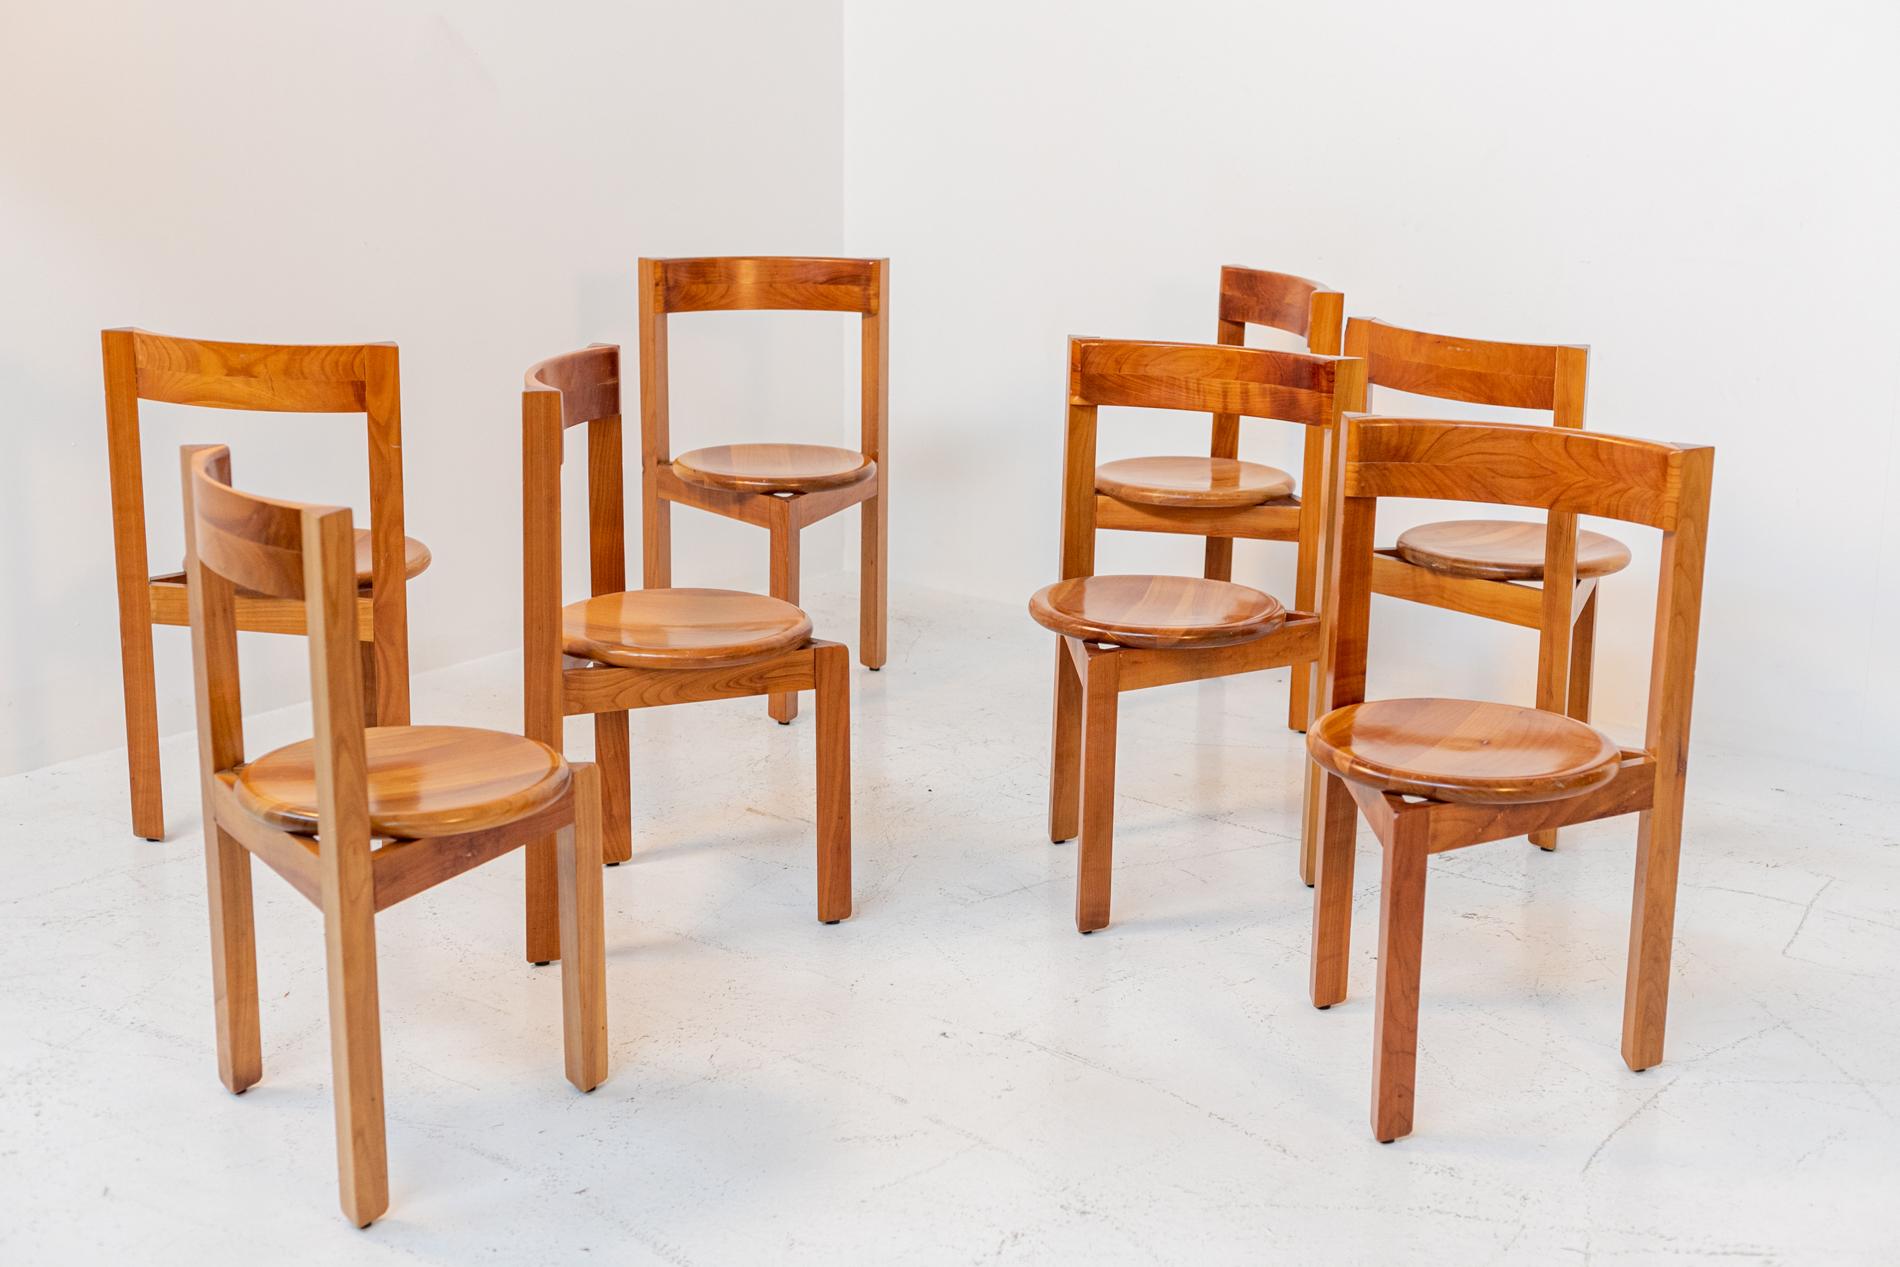 Geometric set of eight Italian chairs from the 1960s. The set from the lines and shapes seems to be post modern but it is from the 60's. The chairs are totally made of wood with excellent workmanship. The chairs enjoy a geometric line well defined